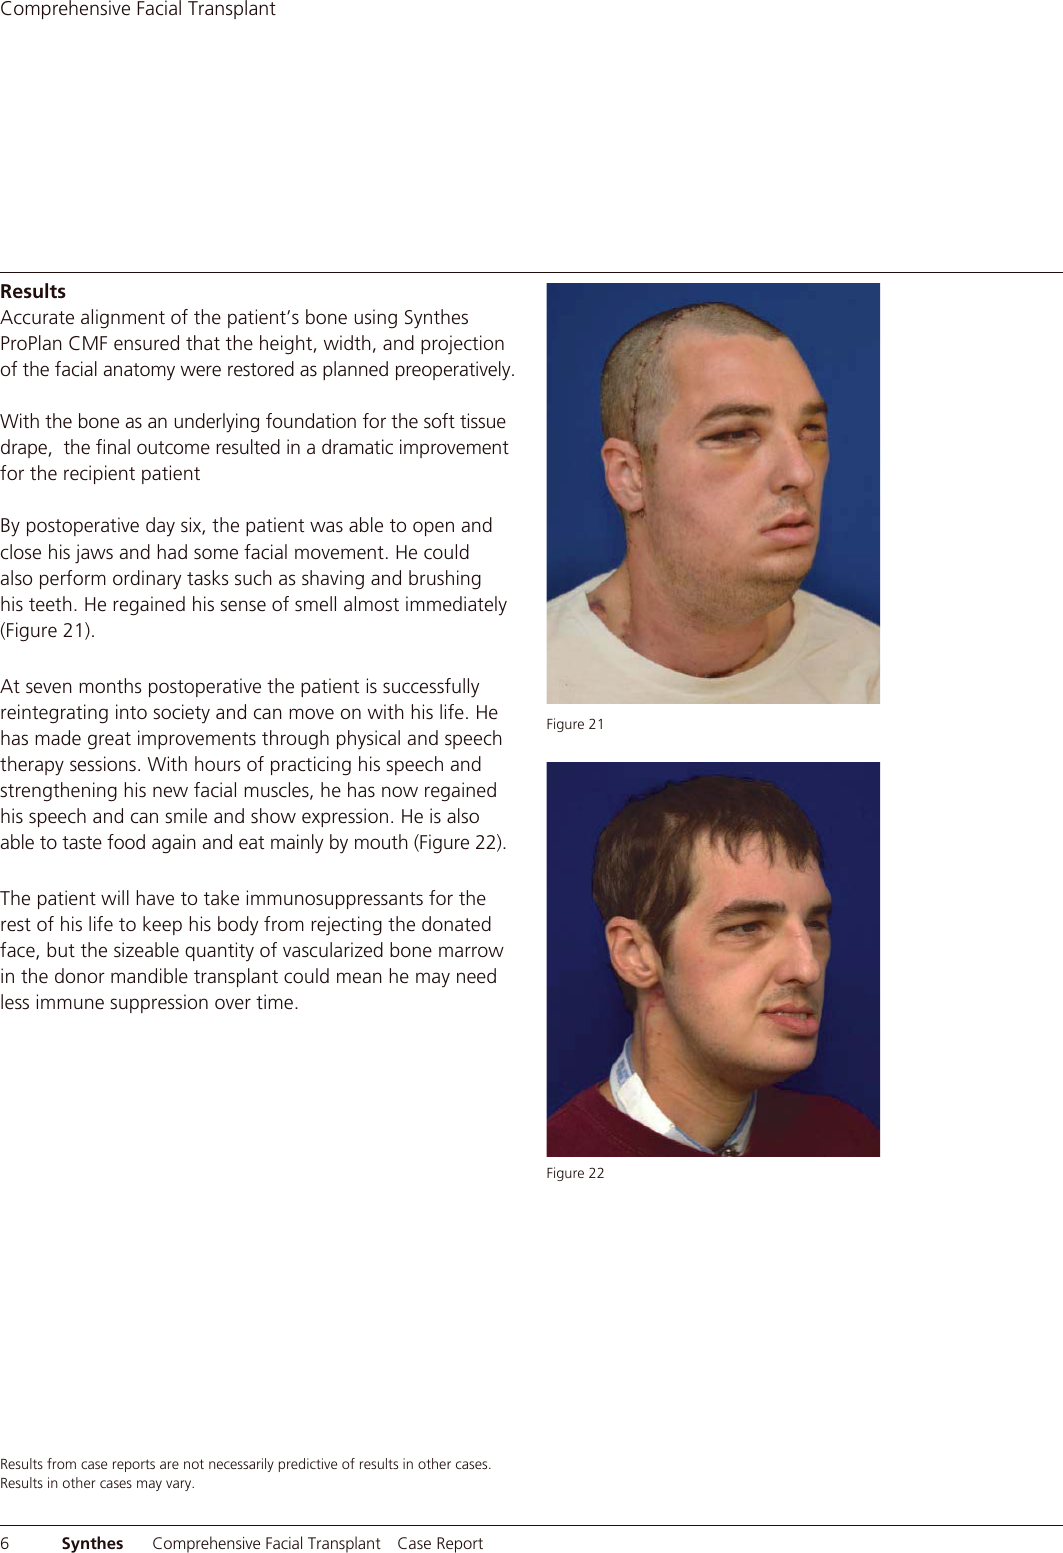 Page 8 of 12 - 11702A_LoRes For Reference  MXCSComp Facial Trans J11702A